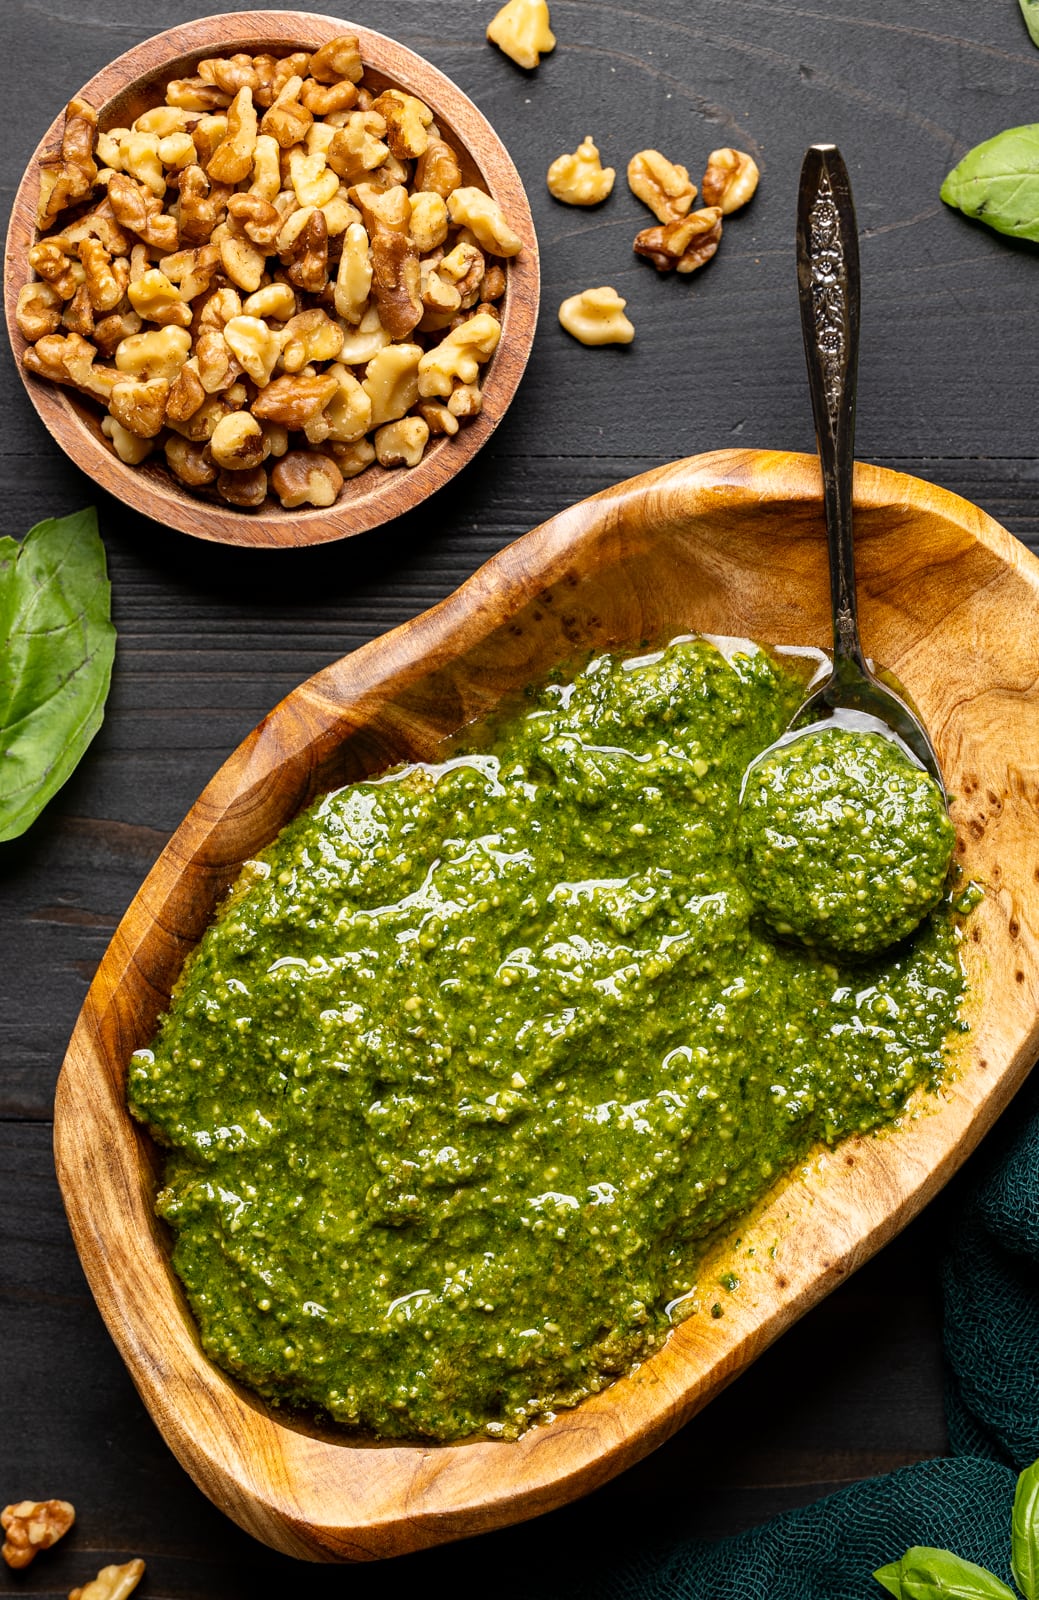 Pesto sauce in a brown wood bowl with a spoon on a black wood table with walnuts and basil leaves.